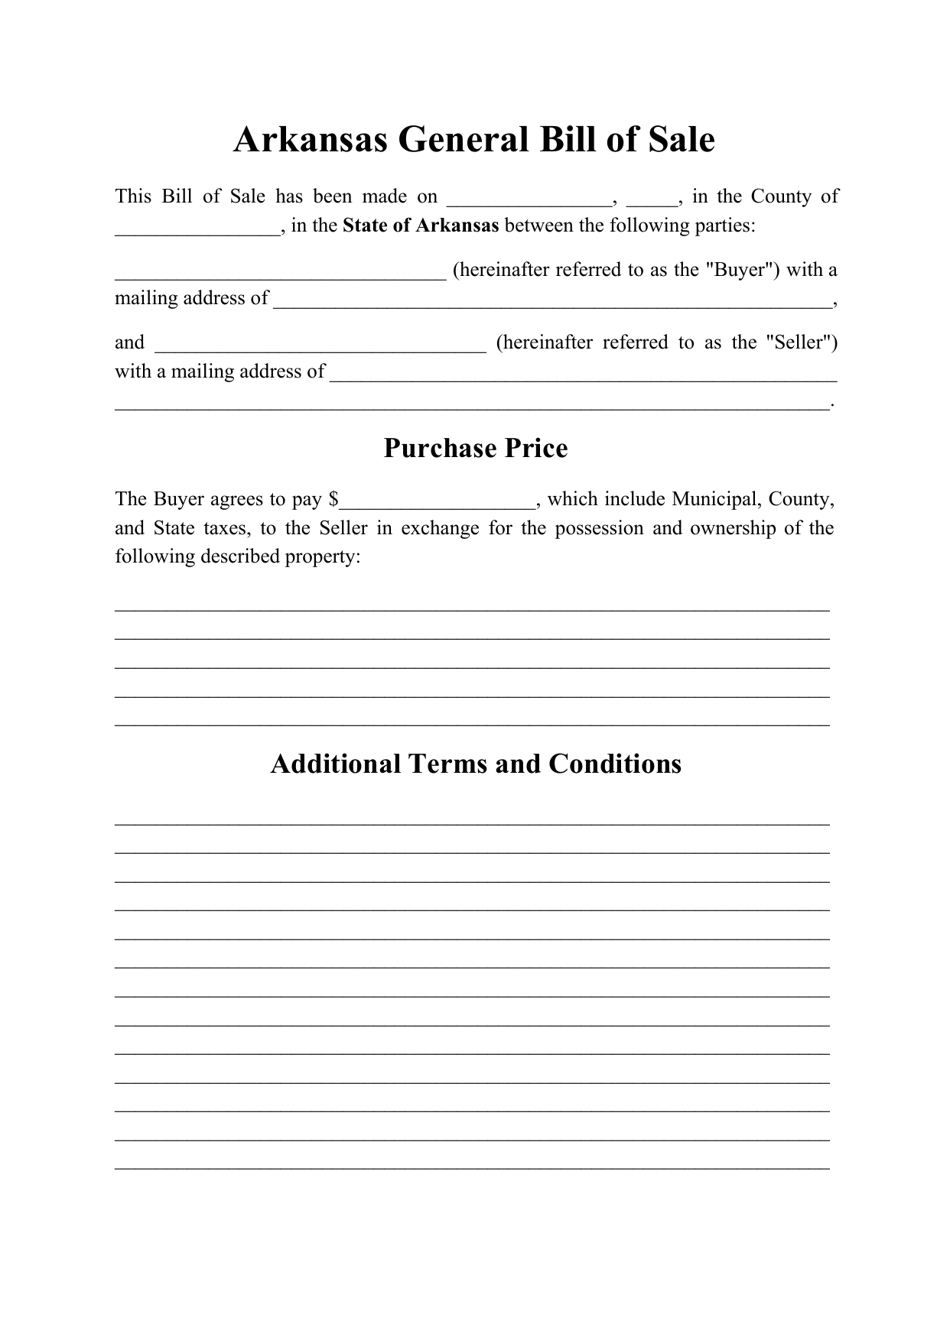 Arkansas Generic Bill of Sale Form Fill Out, Sign Online and Download